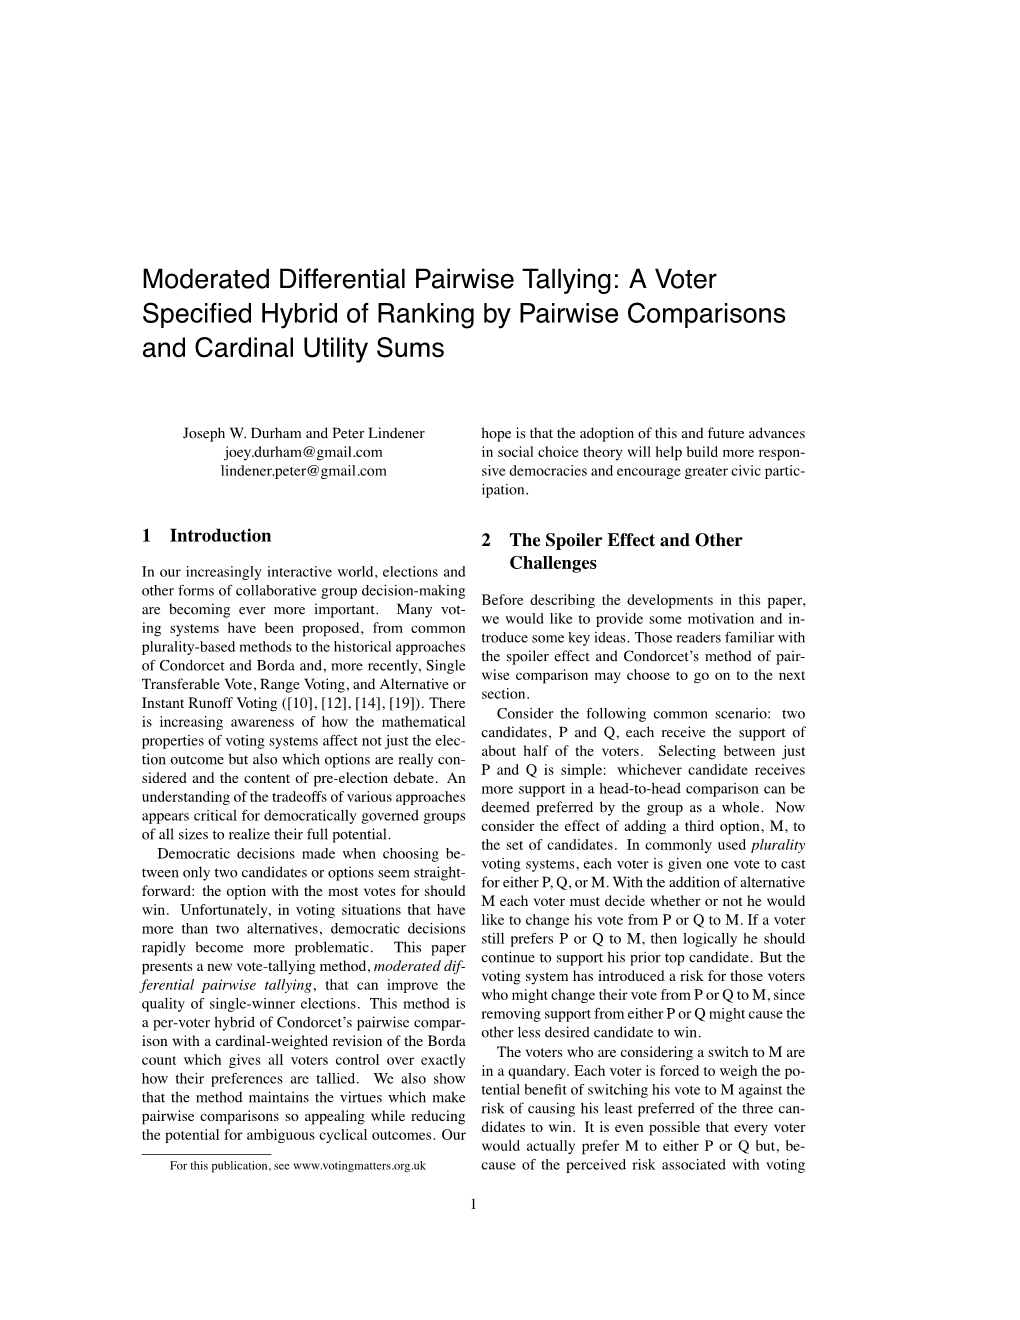 Moderated Differential Pairwise Tallying: a Voter Specified Hybrid of Ranking by Pairwise Comparisons and Cardinal Utility Sums